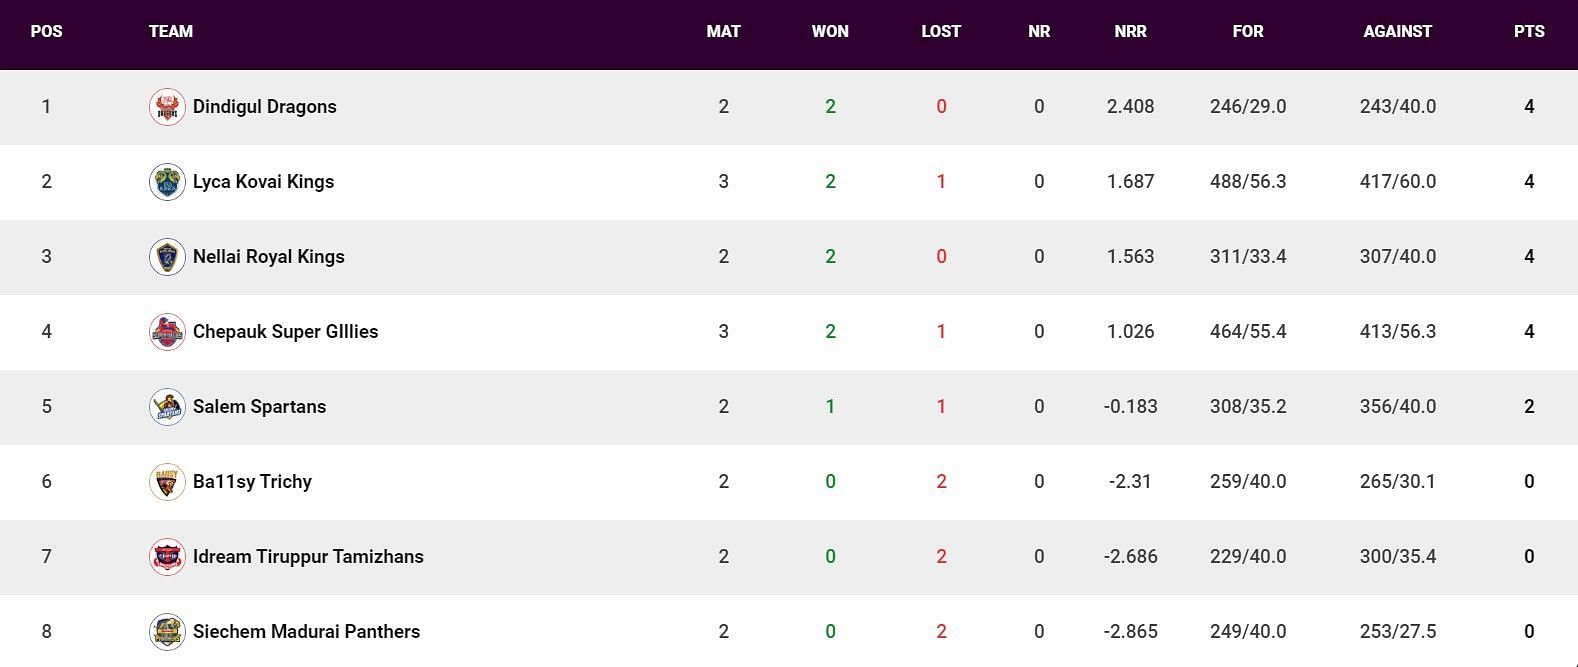 Updated Points Table after Match 9 (Image Courtesy: www.tnpl.com)